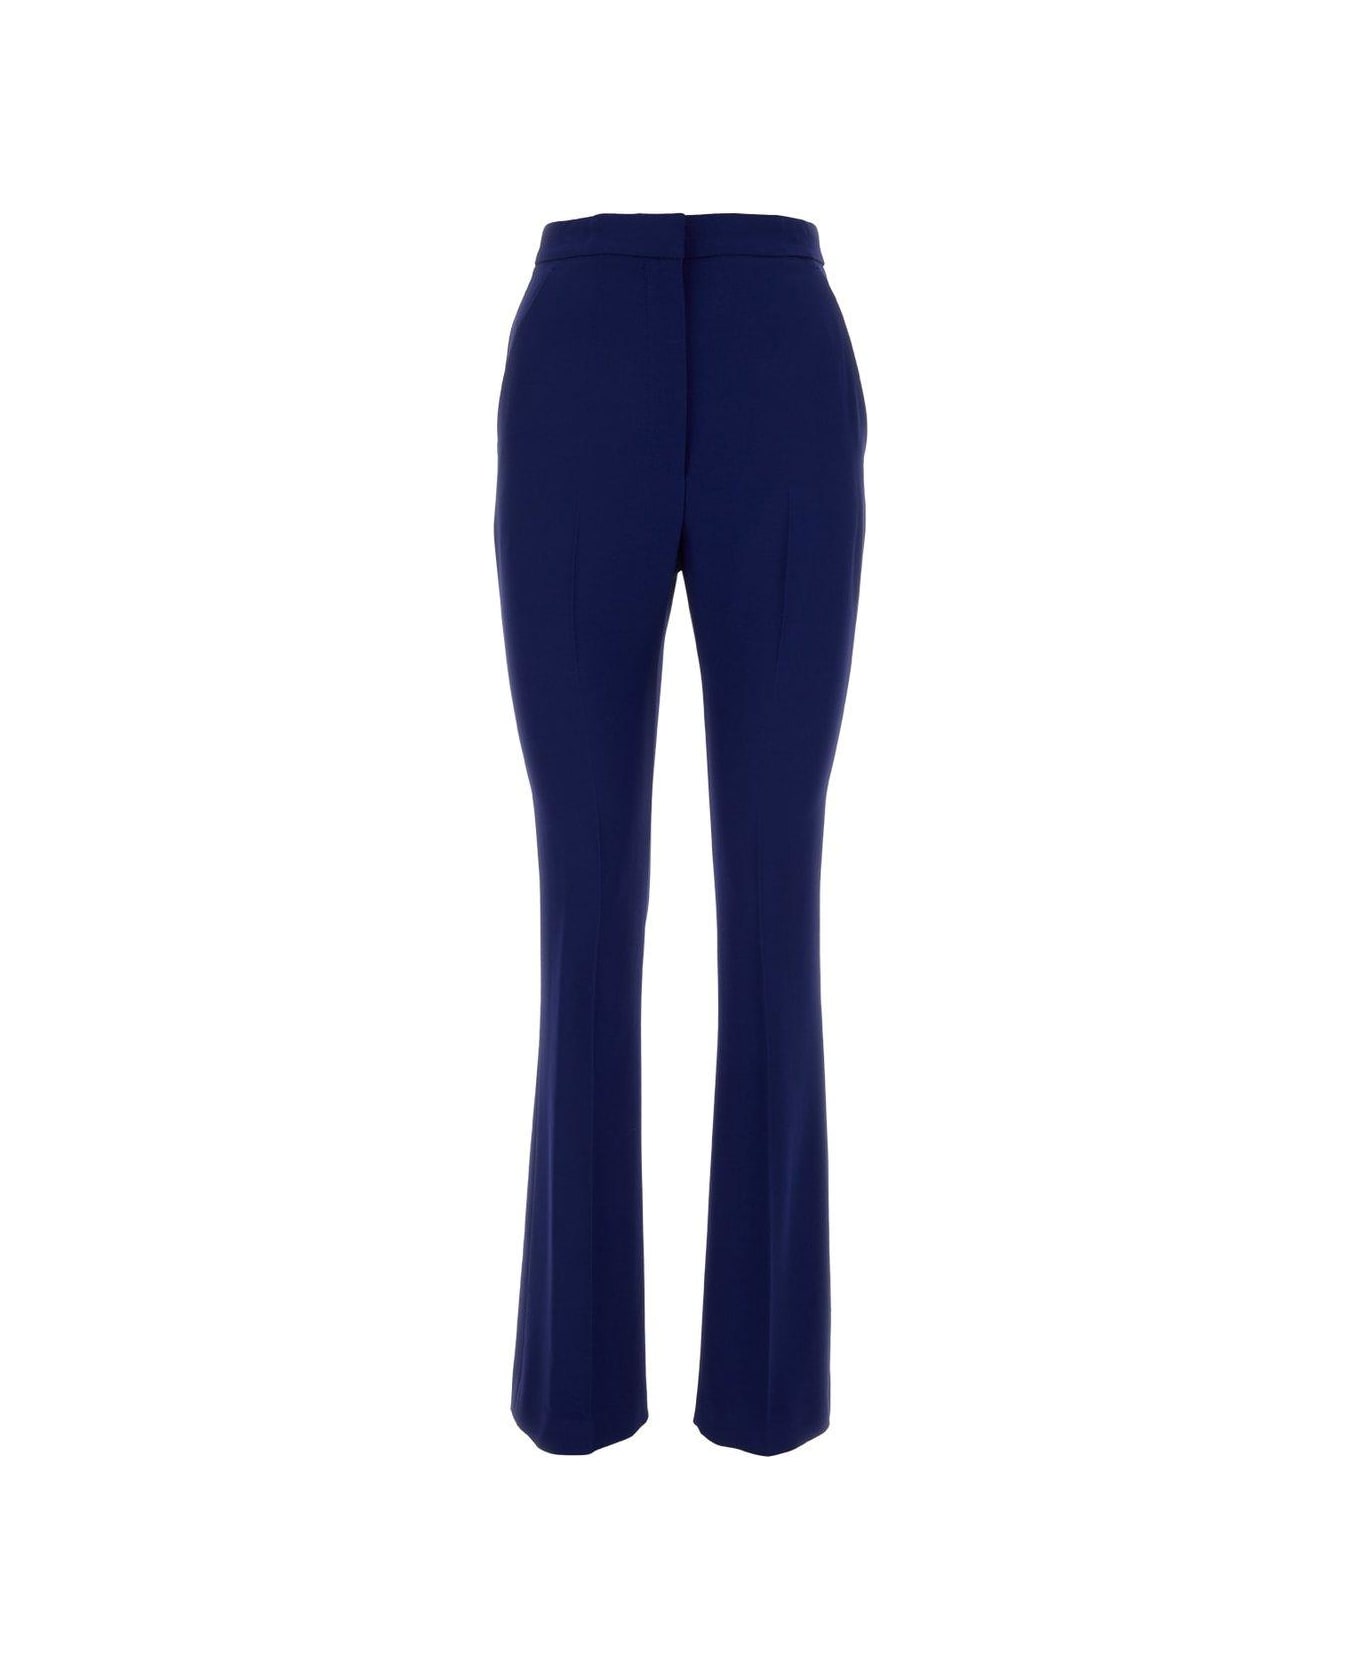 Alexander McQueen High-waisted Bootcut Slim Trousers - Electric navy